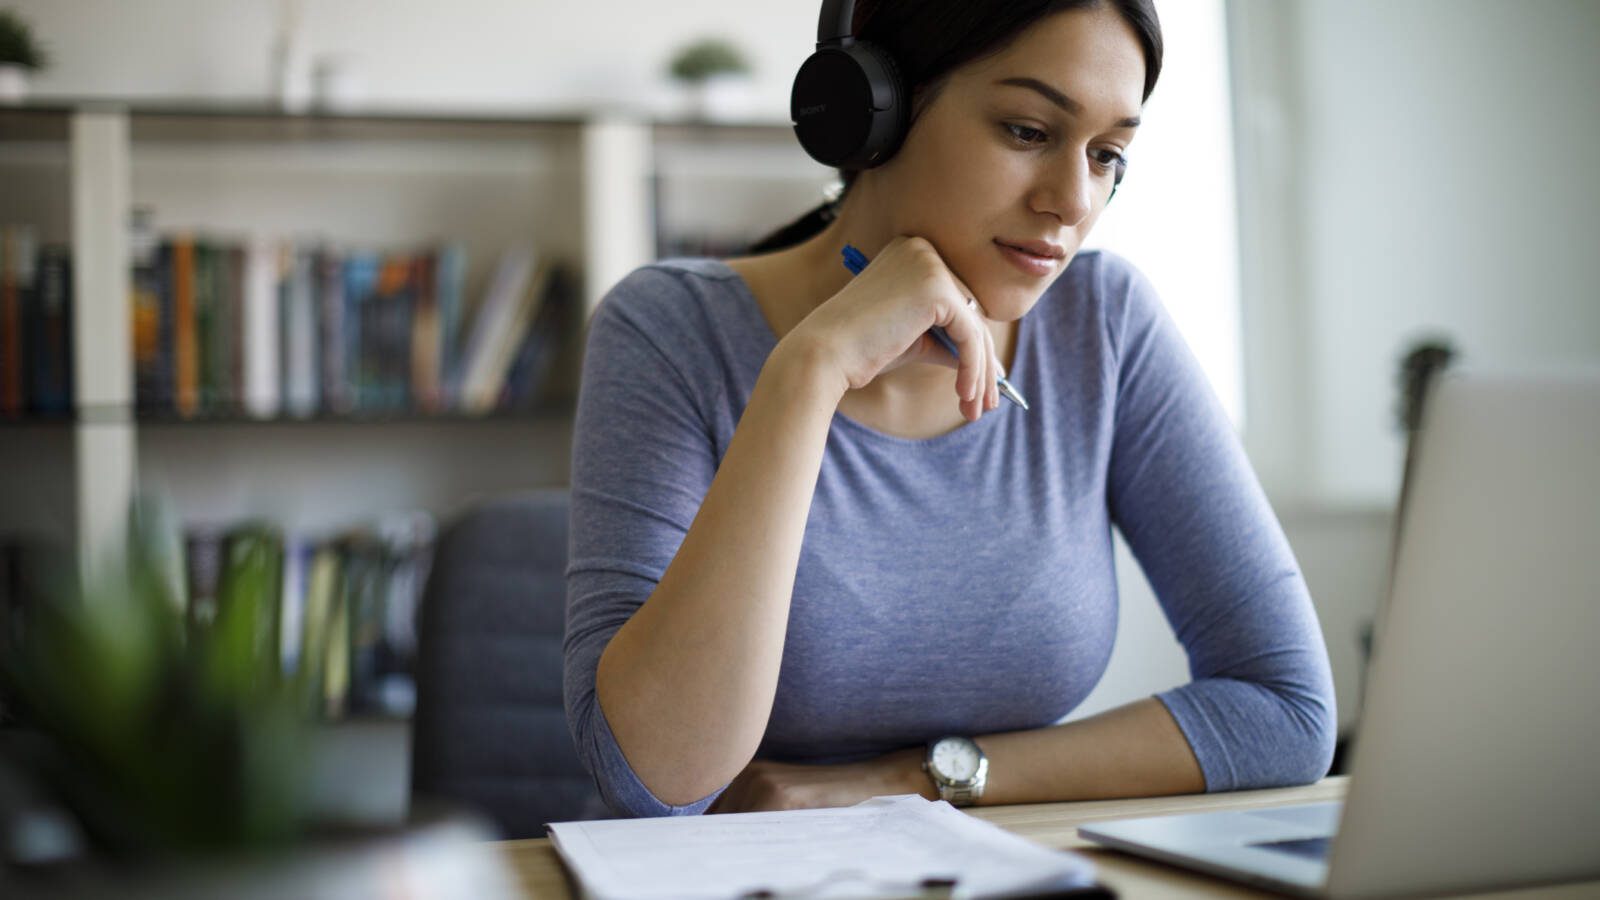 Young woman with headphones working from home